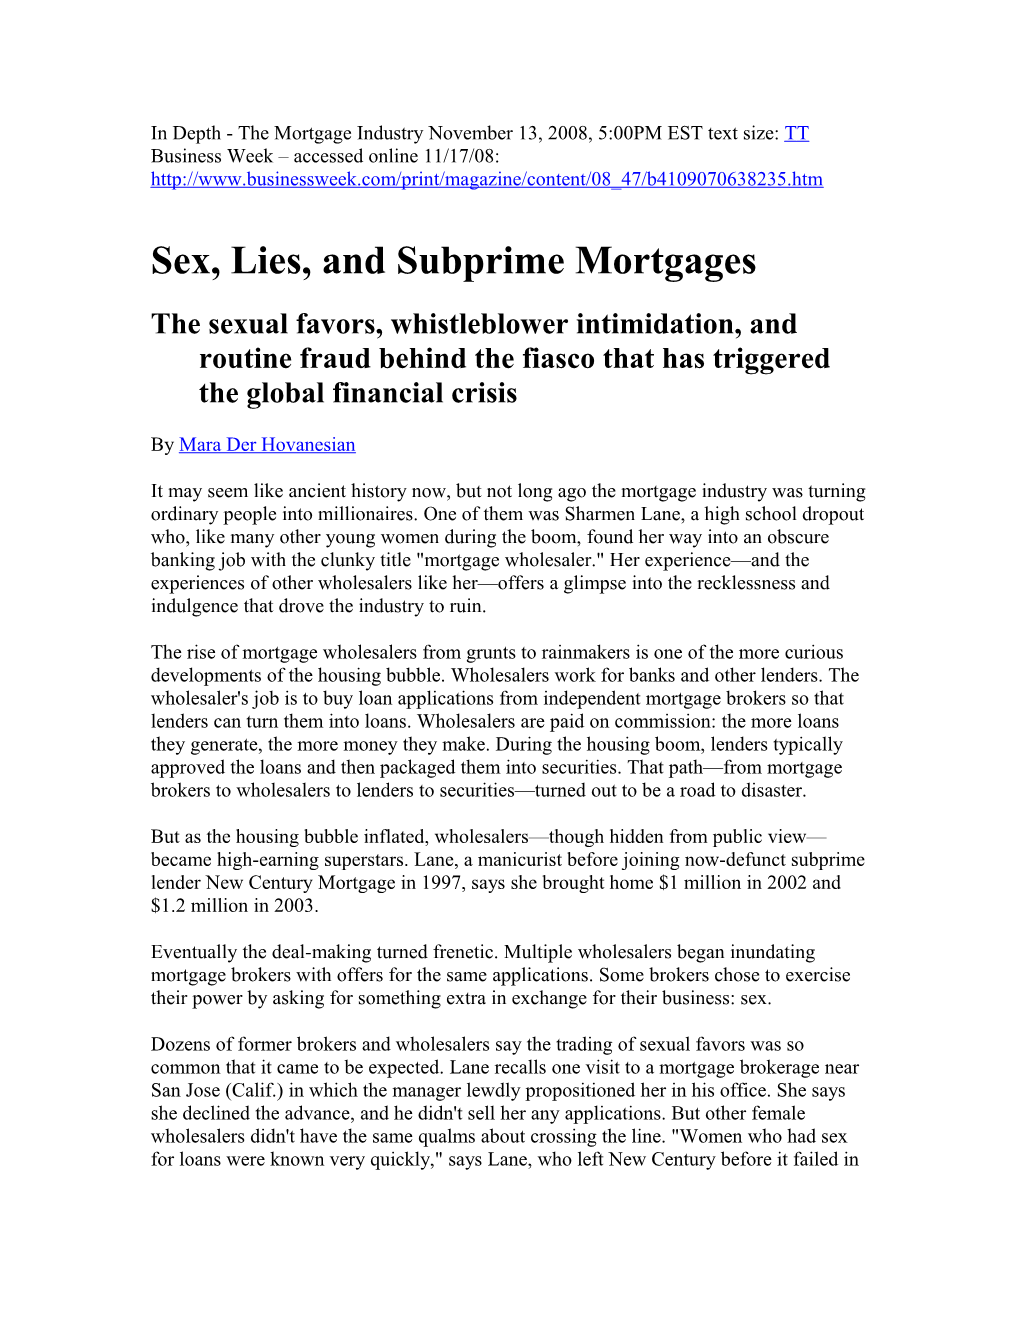 In Depth - the Mortgage Industry November 13, 2008, 5:00PM EST Text Size: TT